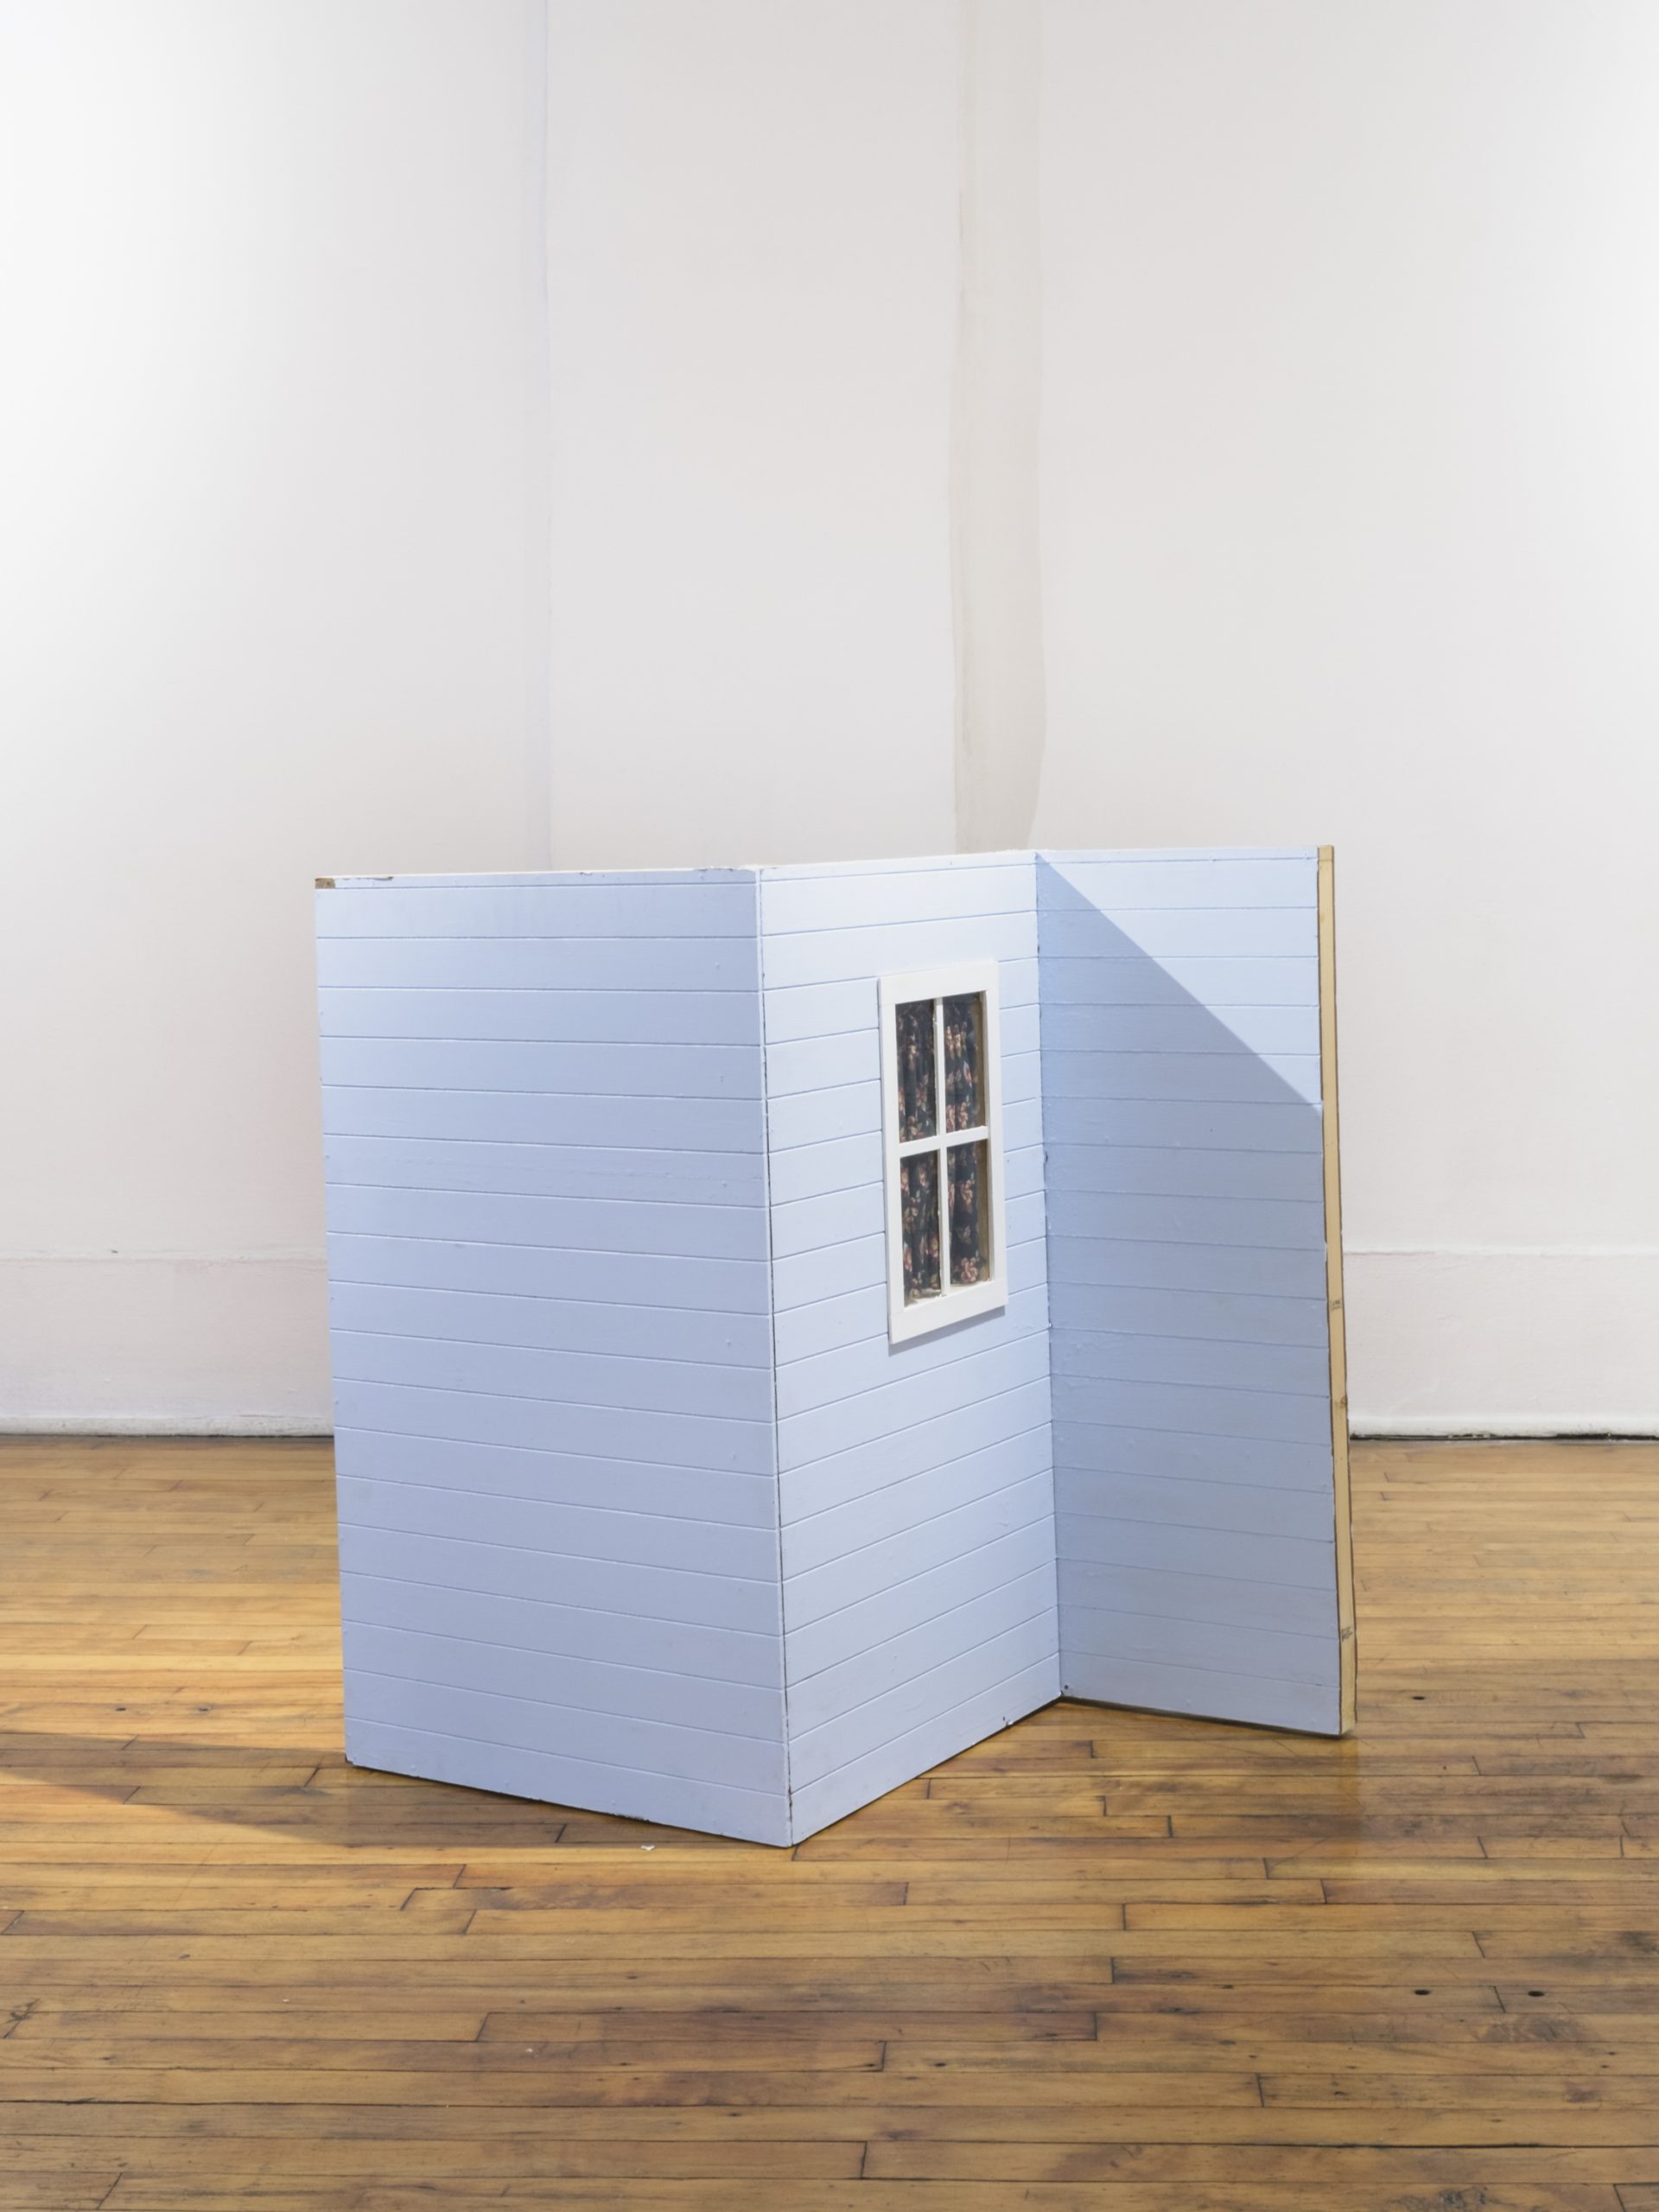 Image: Catherine Hu, Double-sided Outside, 2020, painted MDF, print- transfer on pine, floral fabric, 32" x 36" x 30". A partition-like structure that looks like the side of a light blue house with a window. Image courtesy of Heaven Gallery.